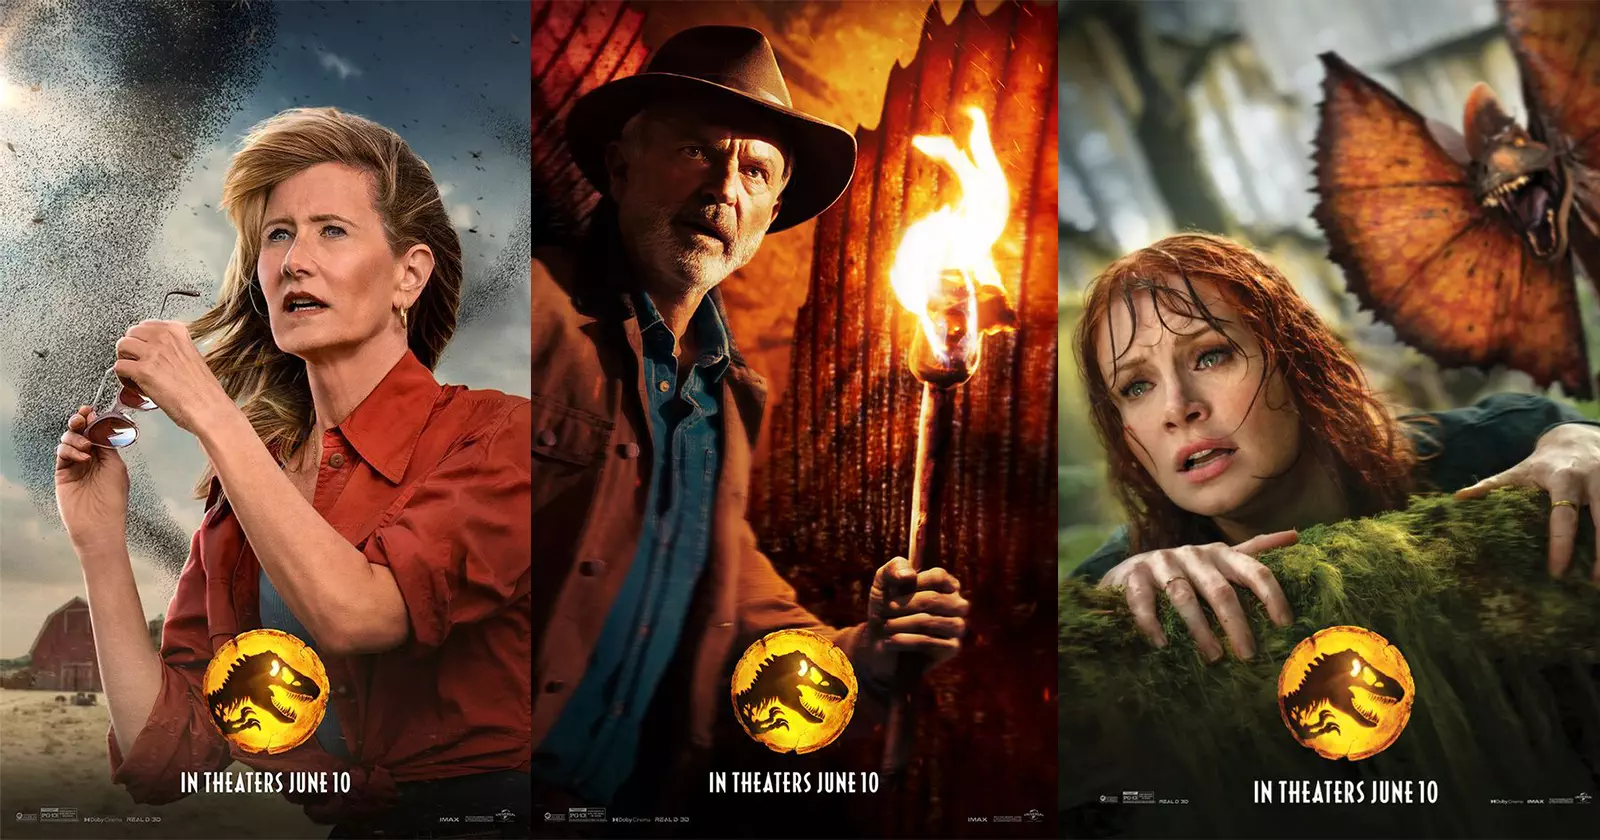 Jurassic World Dominion character posters bring together two eras